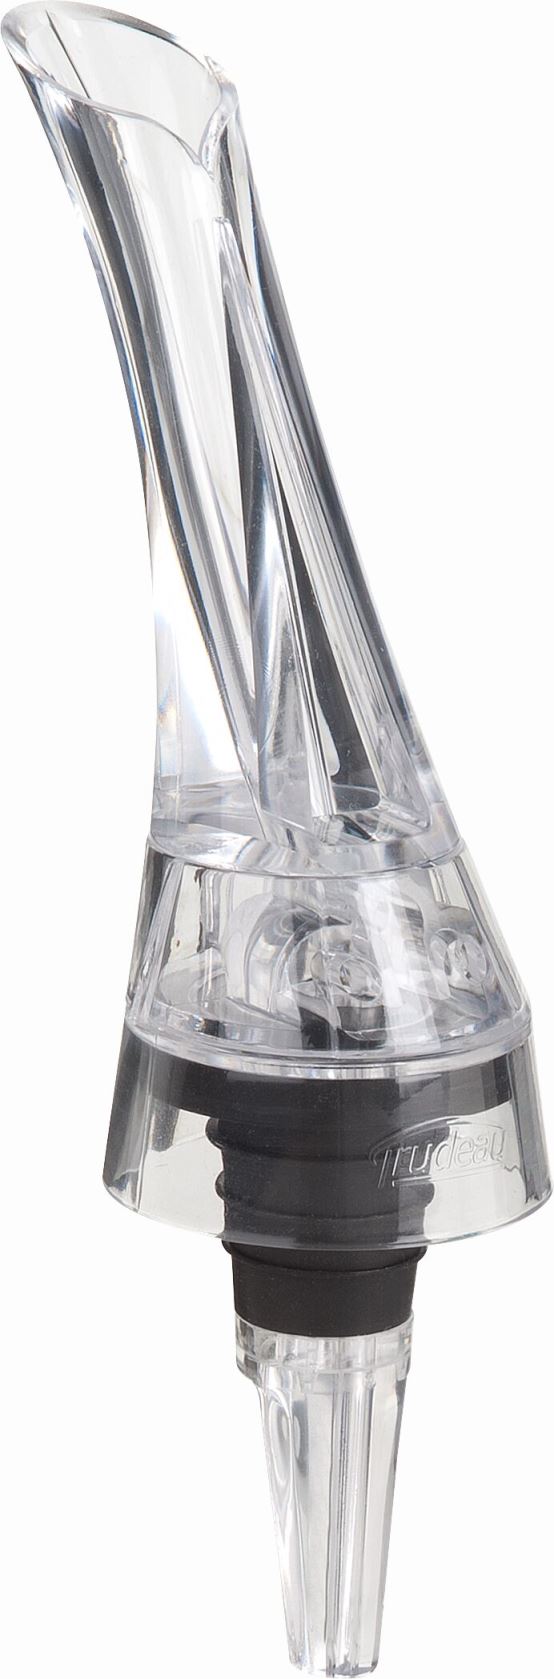 Trudeau Aroma Aerating Pourer (N) | Kitchen Tools